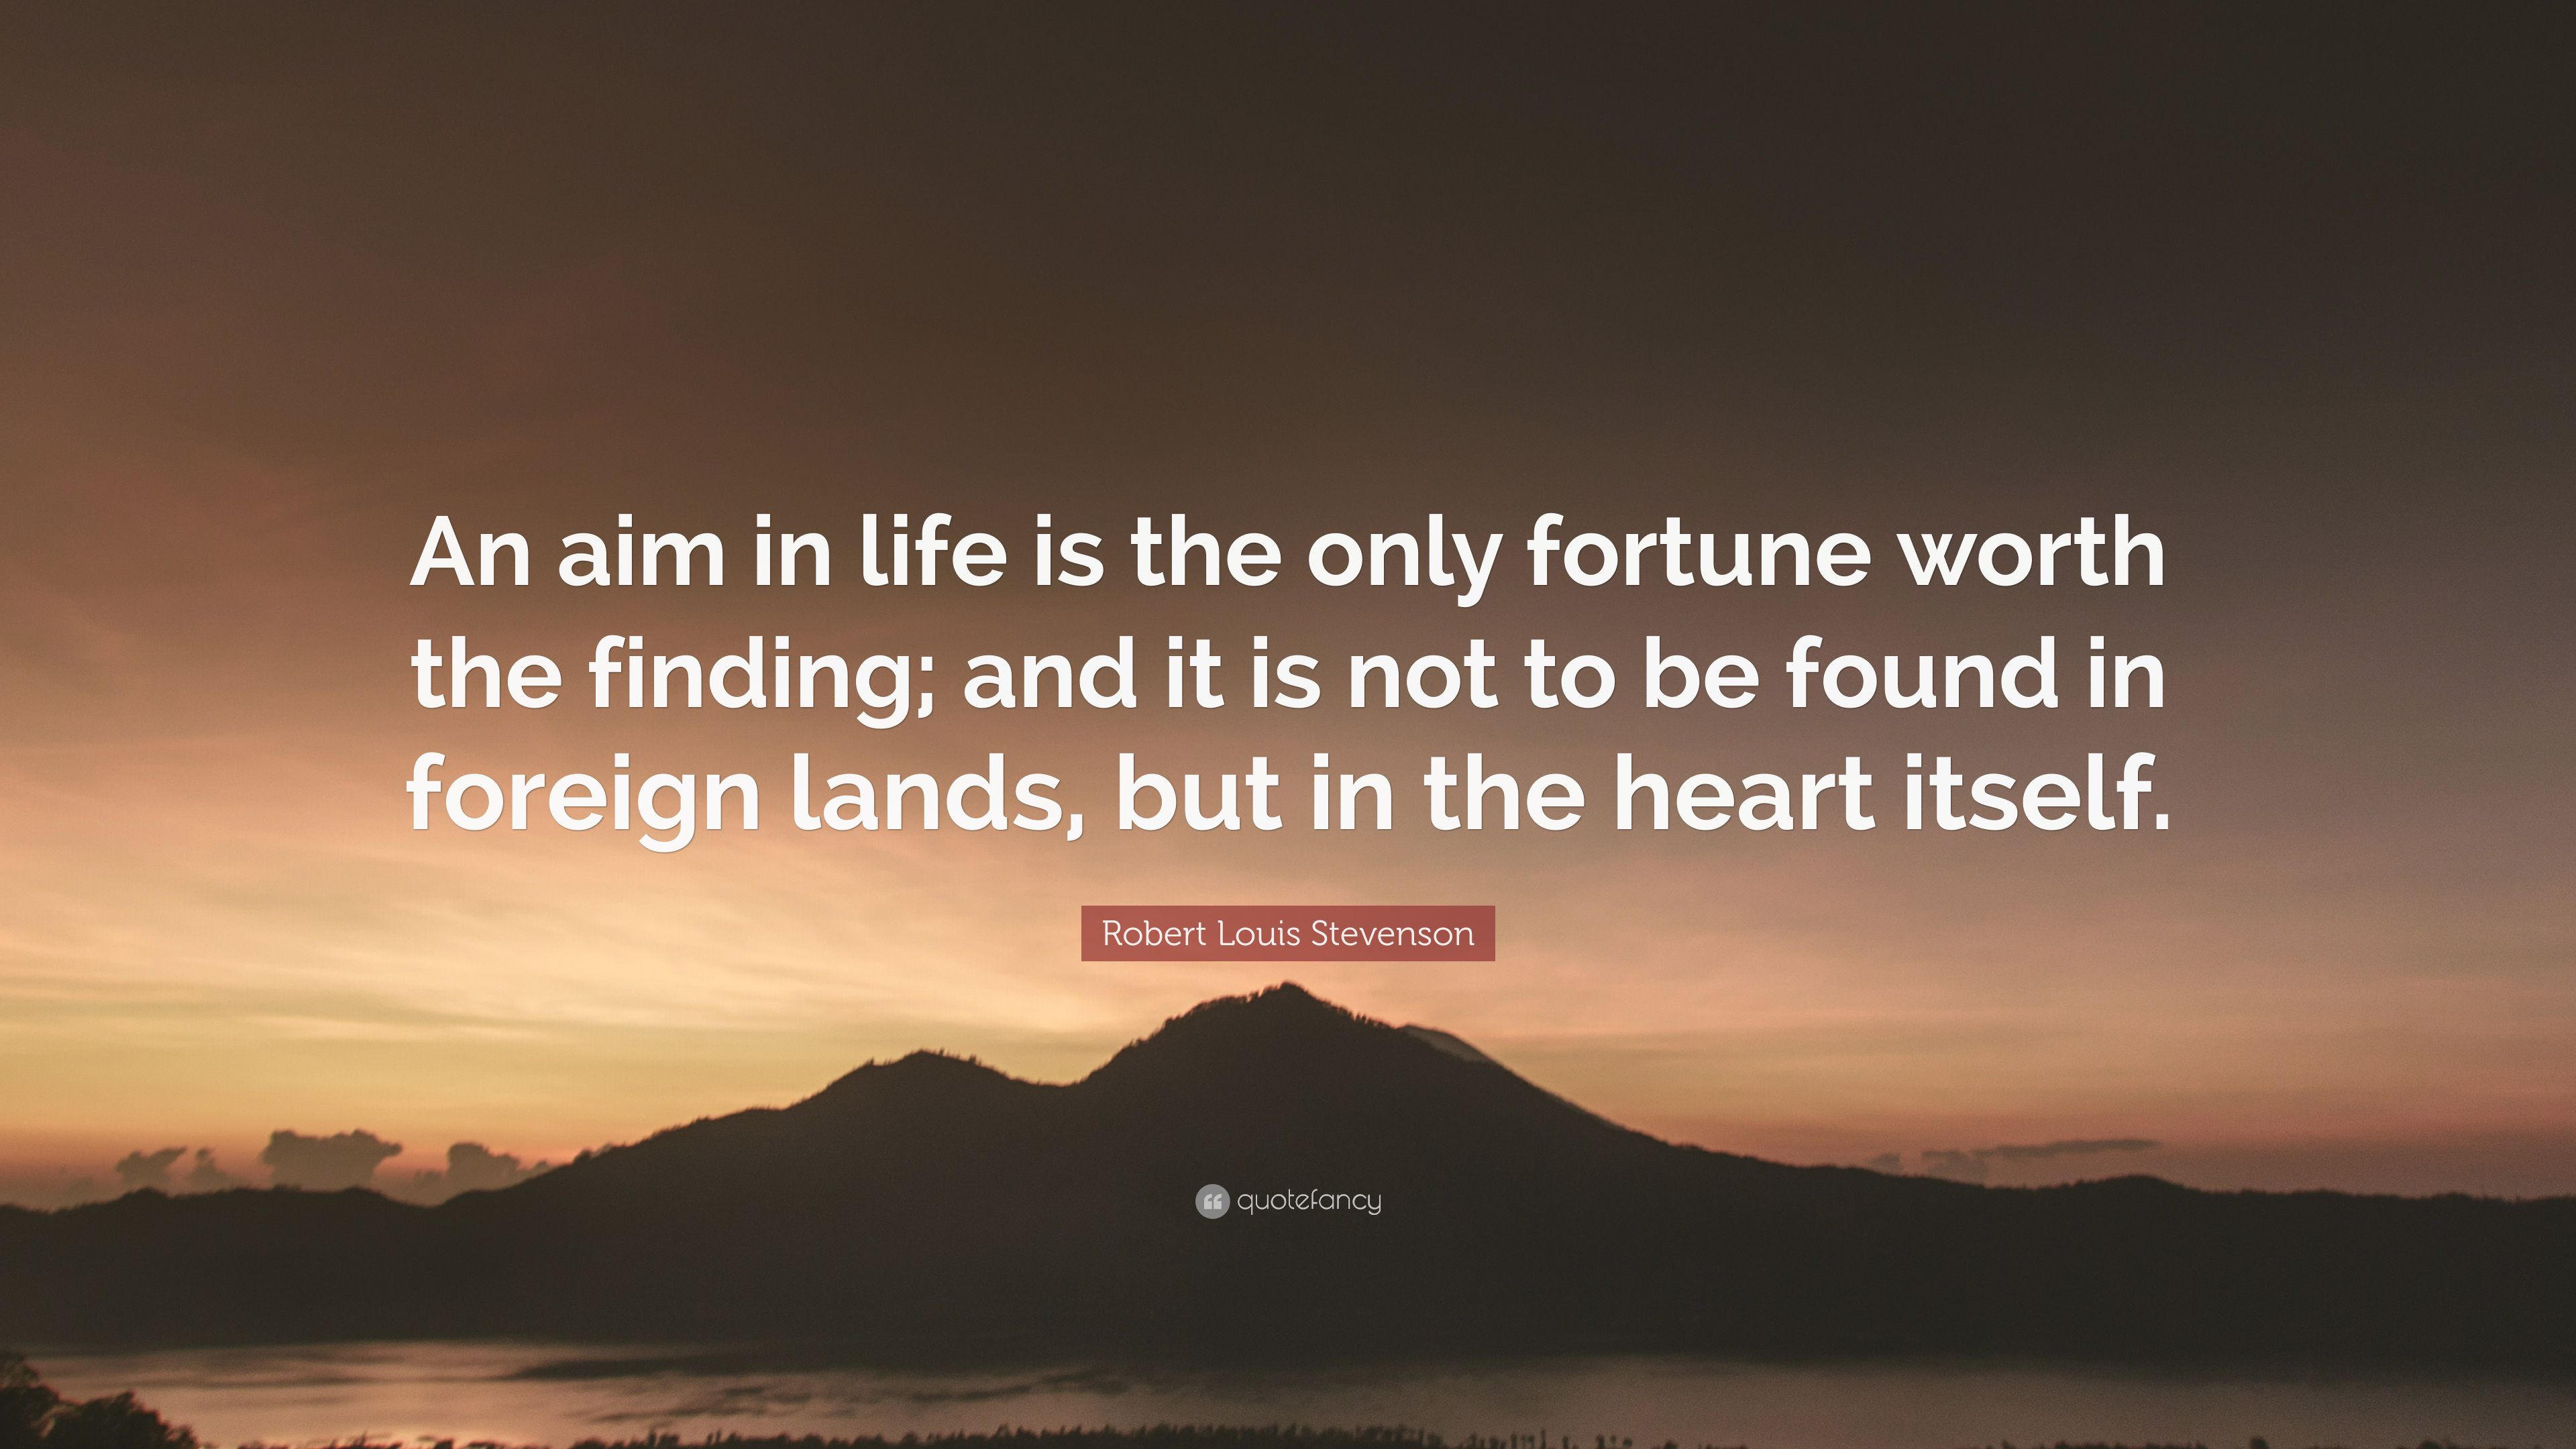 Robert Louis Stevenson Quote: “An aim in life is the only fortune